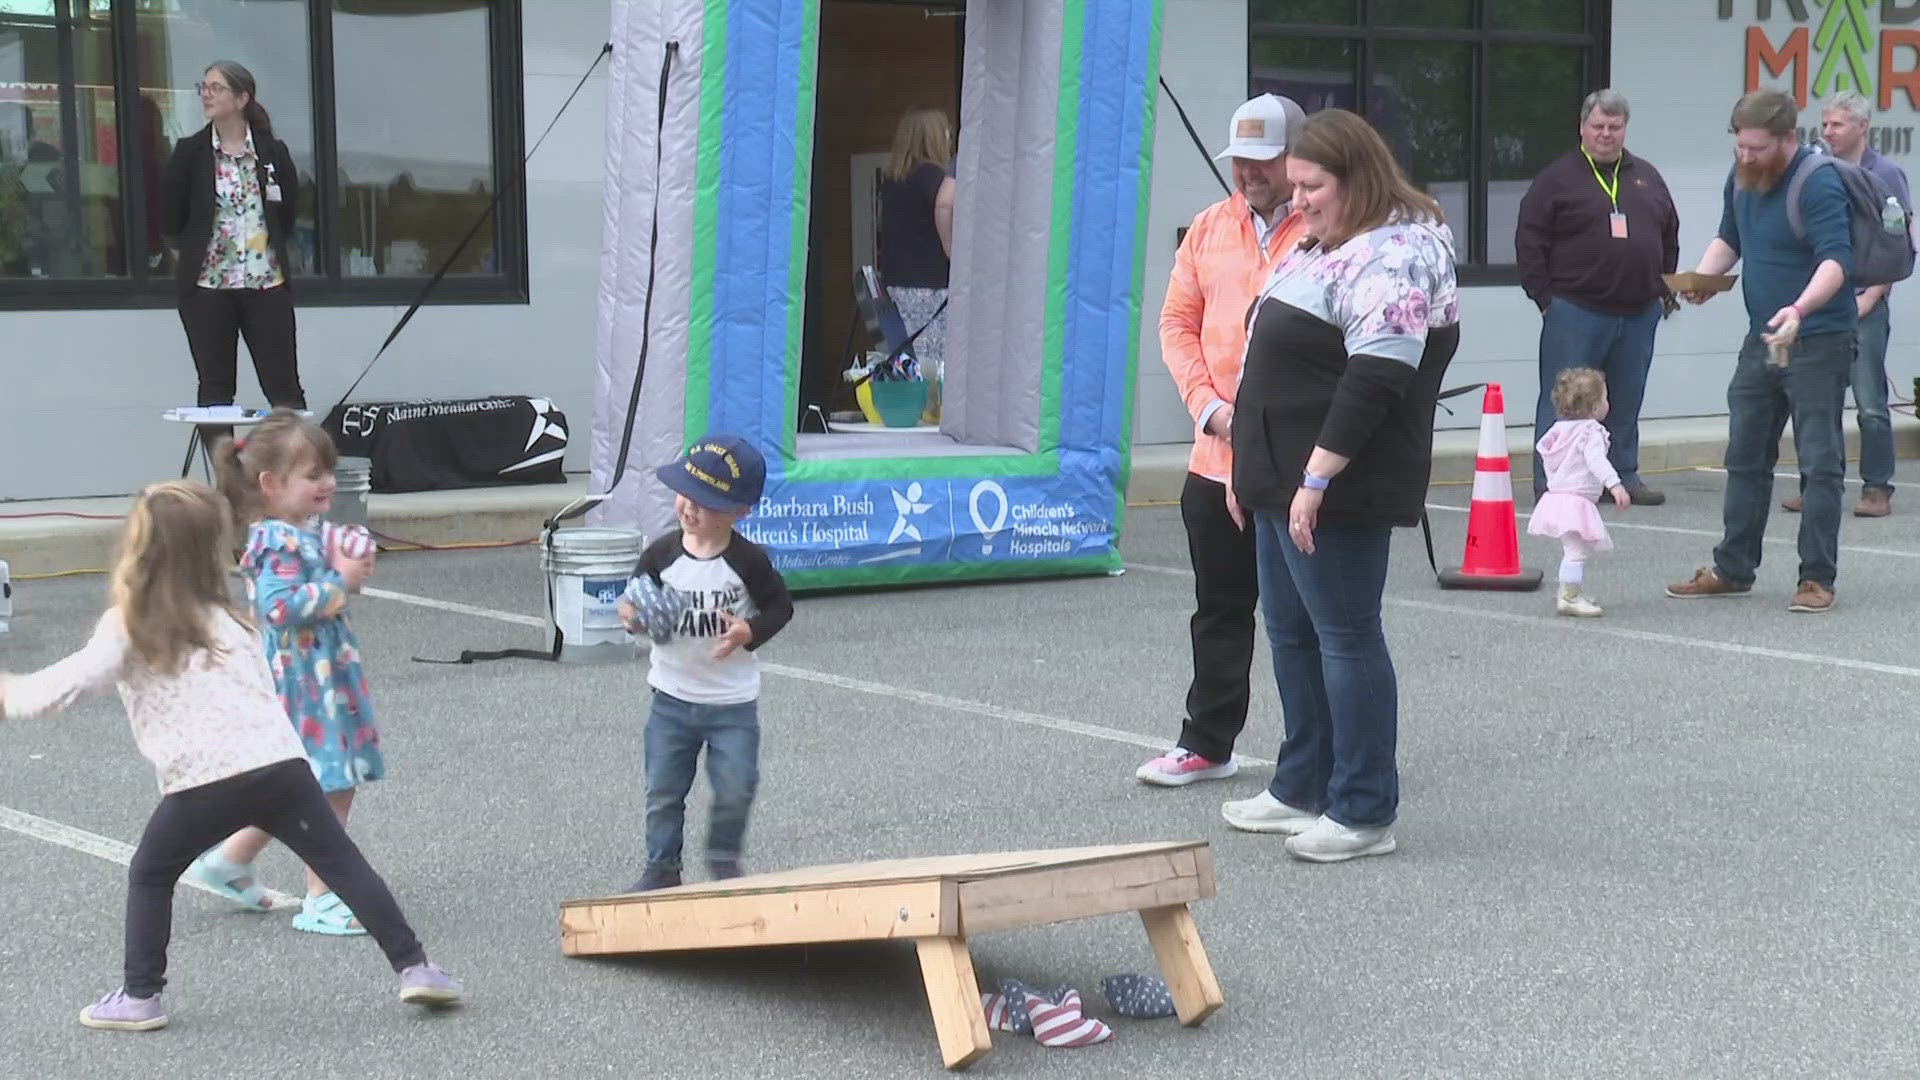 The event was hosted by Trademark Federal Credit Union with live music, food trucks, and a raffle to raise funds for Barbara Bush Children's Hospital.